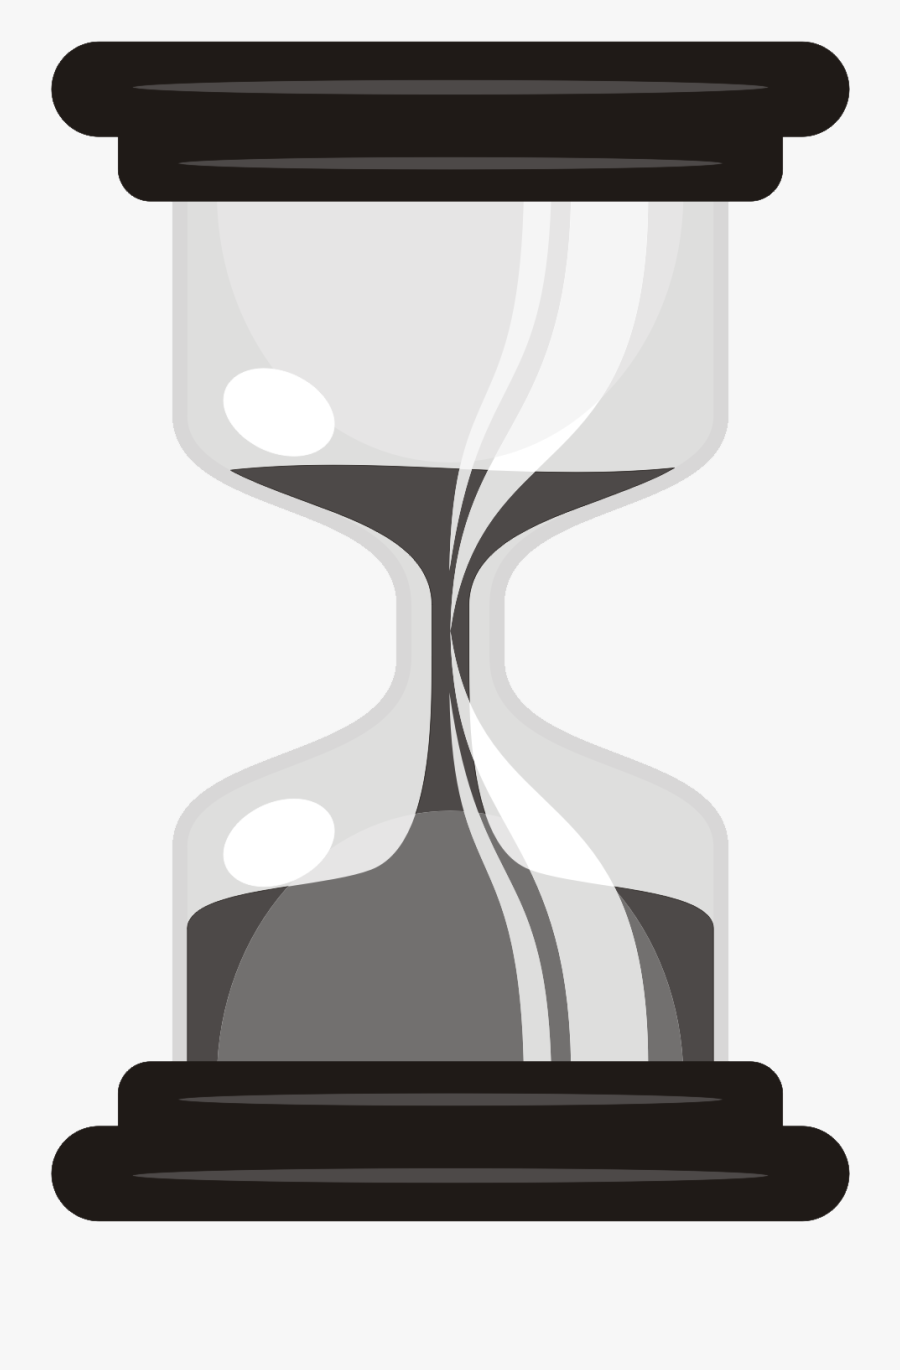 Download Hourglass Png File - Hourglass Png, Transparent Clipart